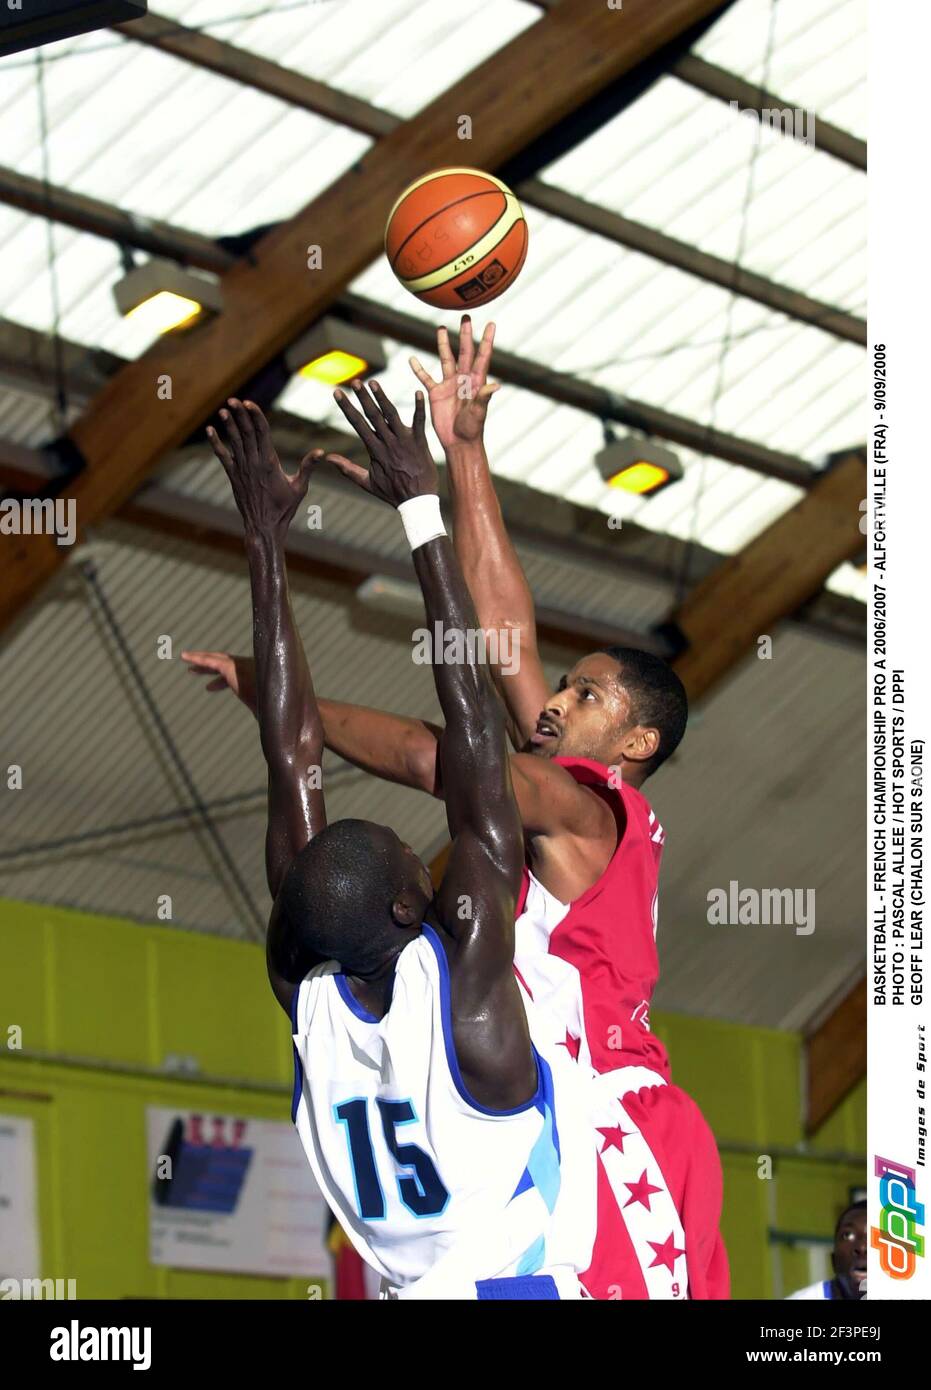 BASKETBALL - FRENCH CHAMPIONSHIP PRO A 2006/2007 - ALFORTVILLE (FRA) -  9/09/2006 PHOTO : PASCAL ALLEE / HOT SPORTS / DPPI GEOFF LEAR (CHALON SUR  SAONE) 15 NDongo N?DIAYE PARIS BASKET 2006/2007